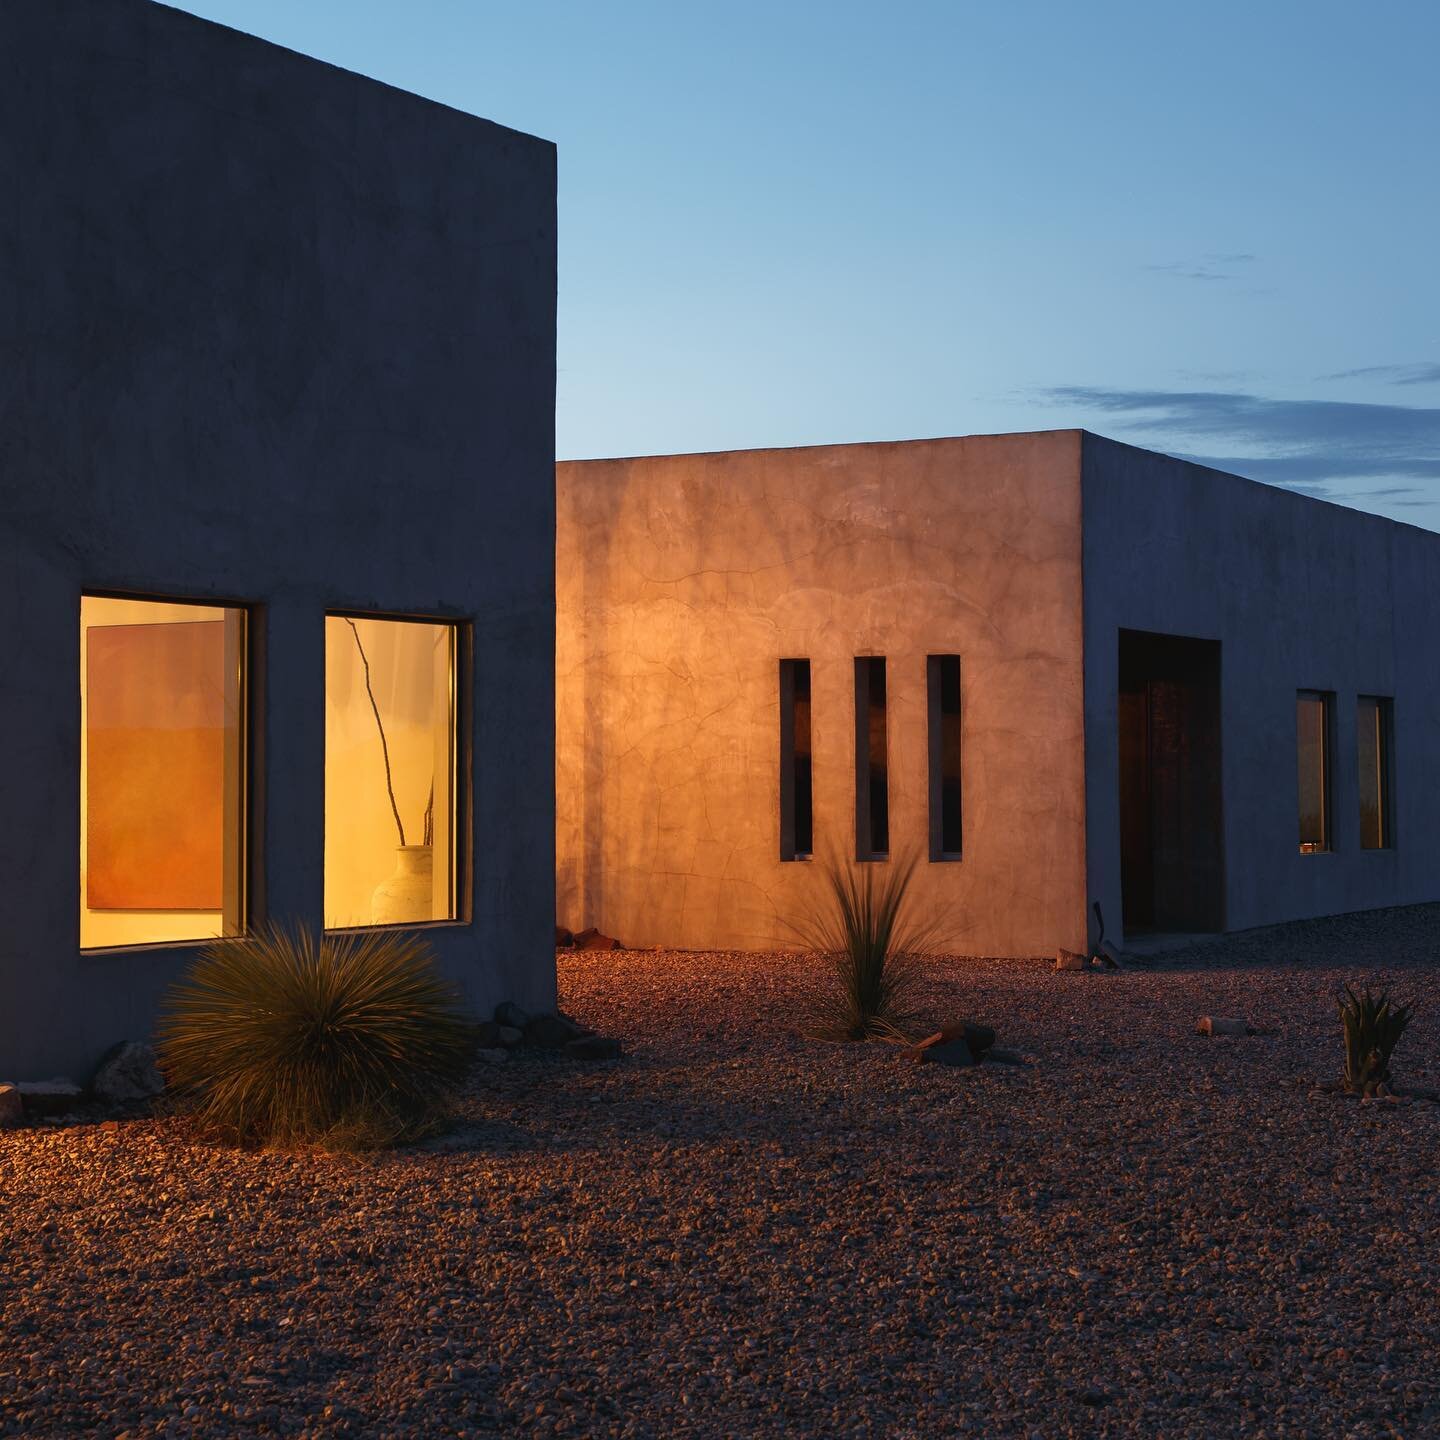 This photo by @parker.thornton so accurately portrays Willow House. An austere, monochromatic exterior and a warm, glowing interior. Filled with friendly faces and familiar strangers that may become friends. A safe place to isolate in the vast desert